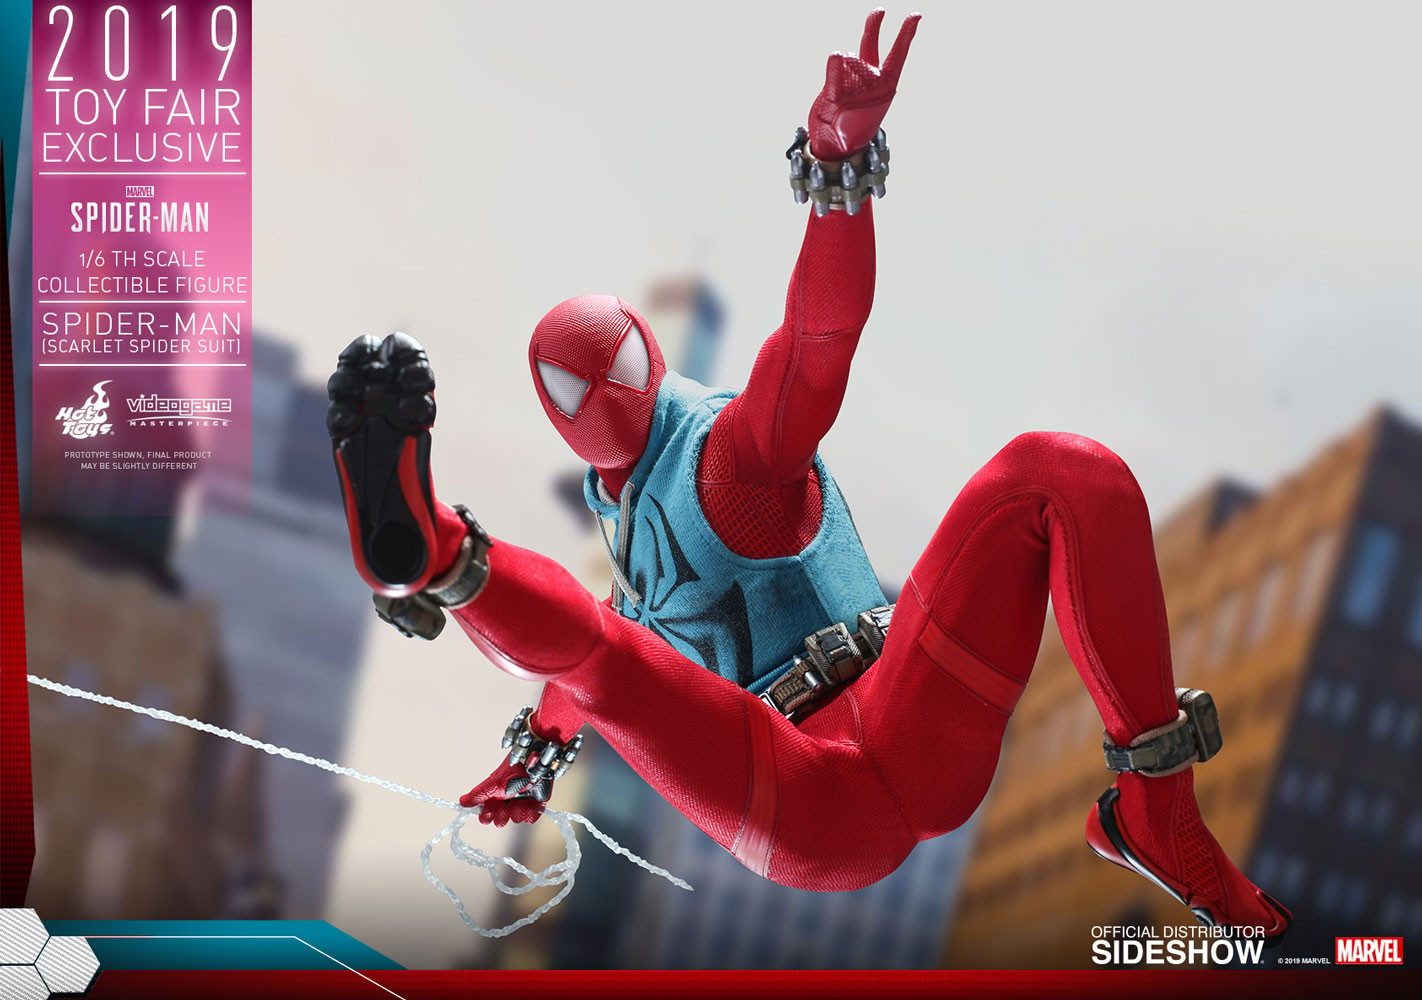 Spider-Man (Scarlet Spider Suit) Exclusive Edition (Prototype Shown) View 18